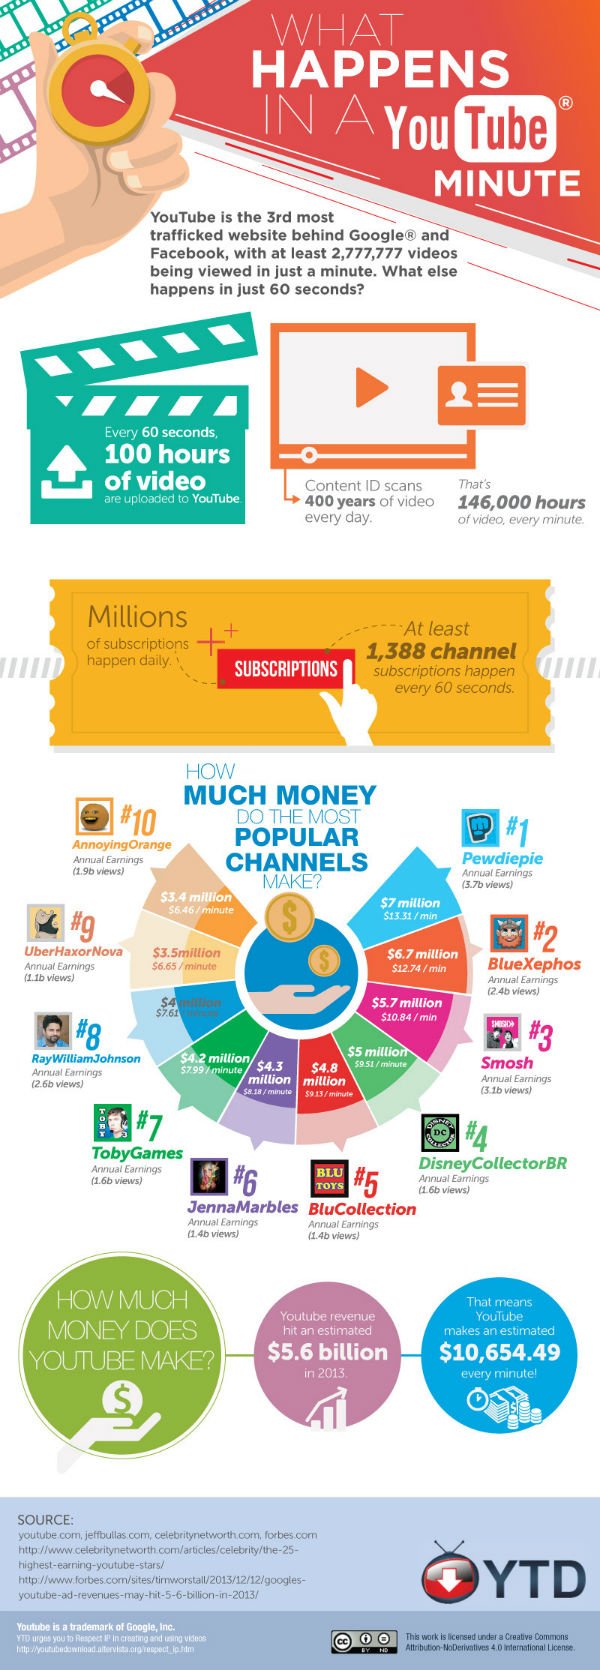 what-happens-in-a-youtube-minute-social-media-facts-infographic